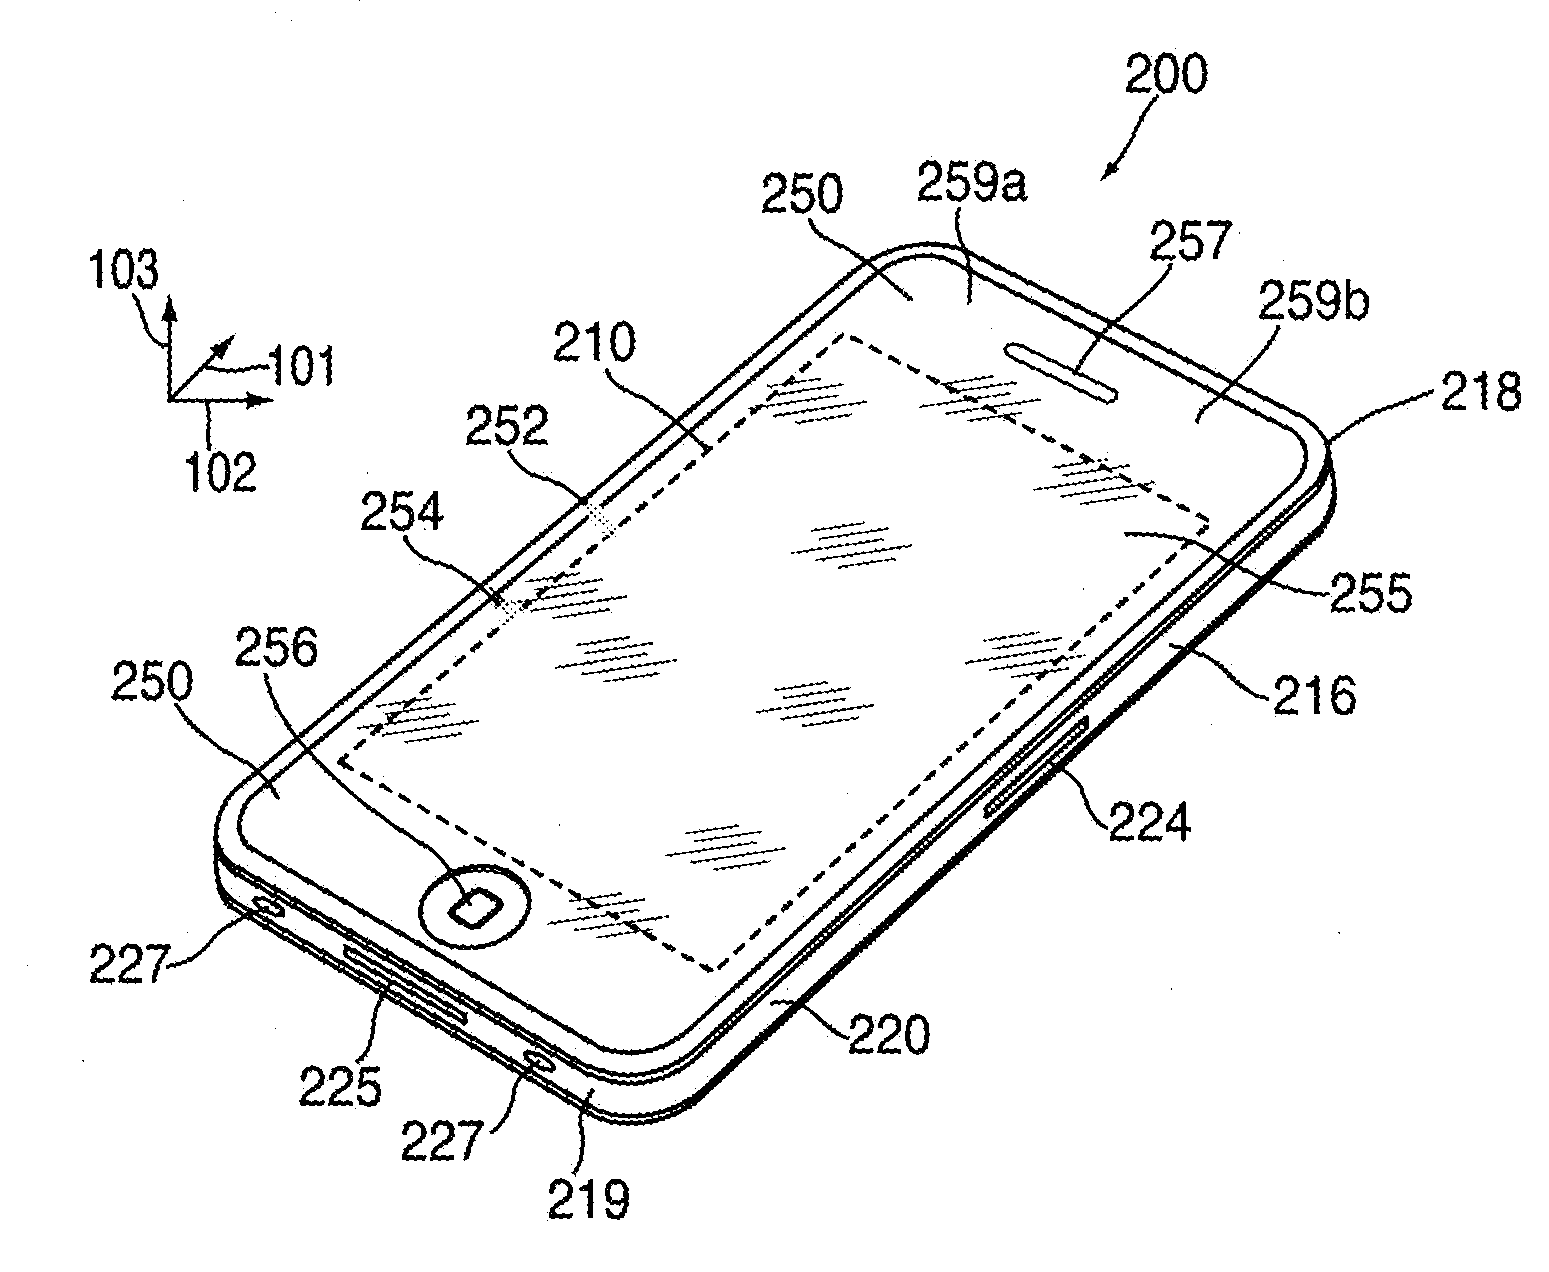 Offset Control for Assemblying an Electronic Device Housing